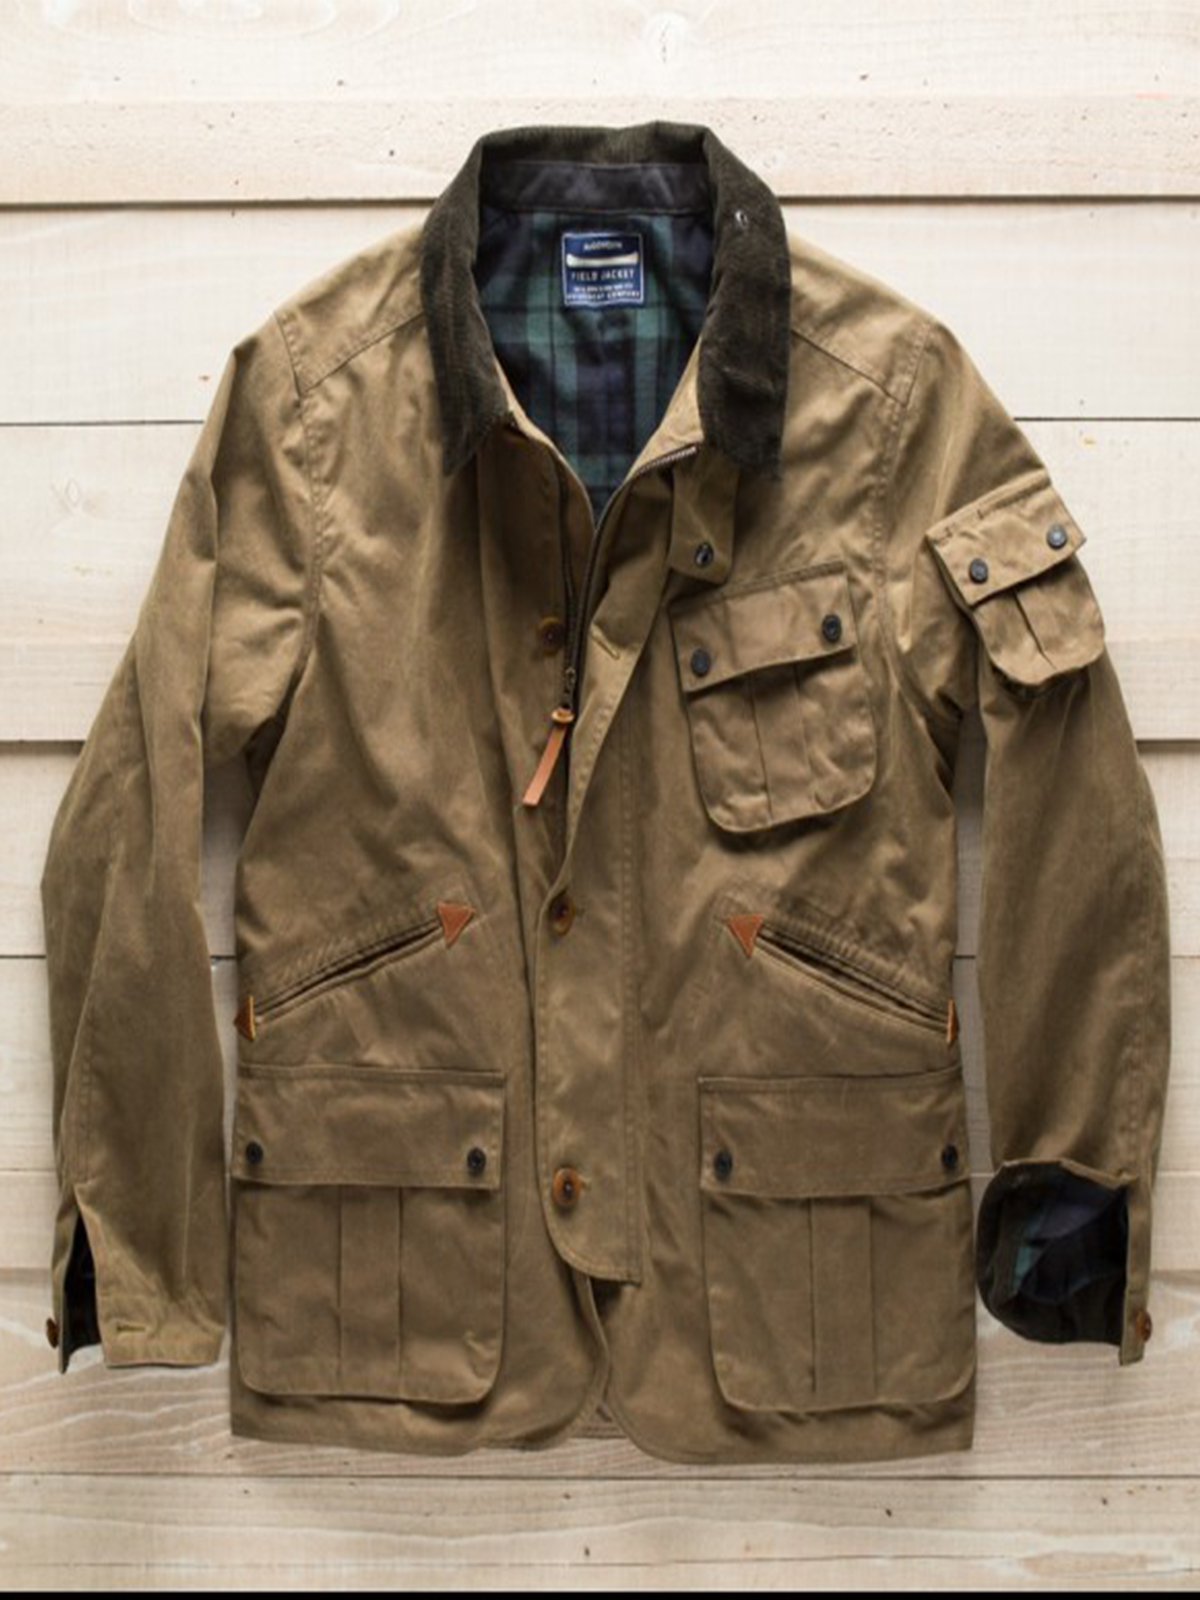 The Algonquin Field Brown Jacket